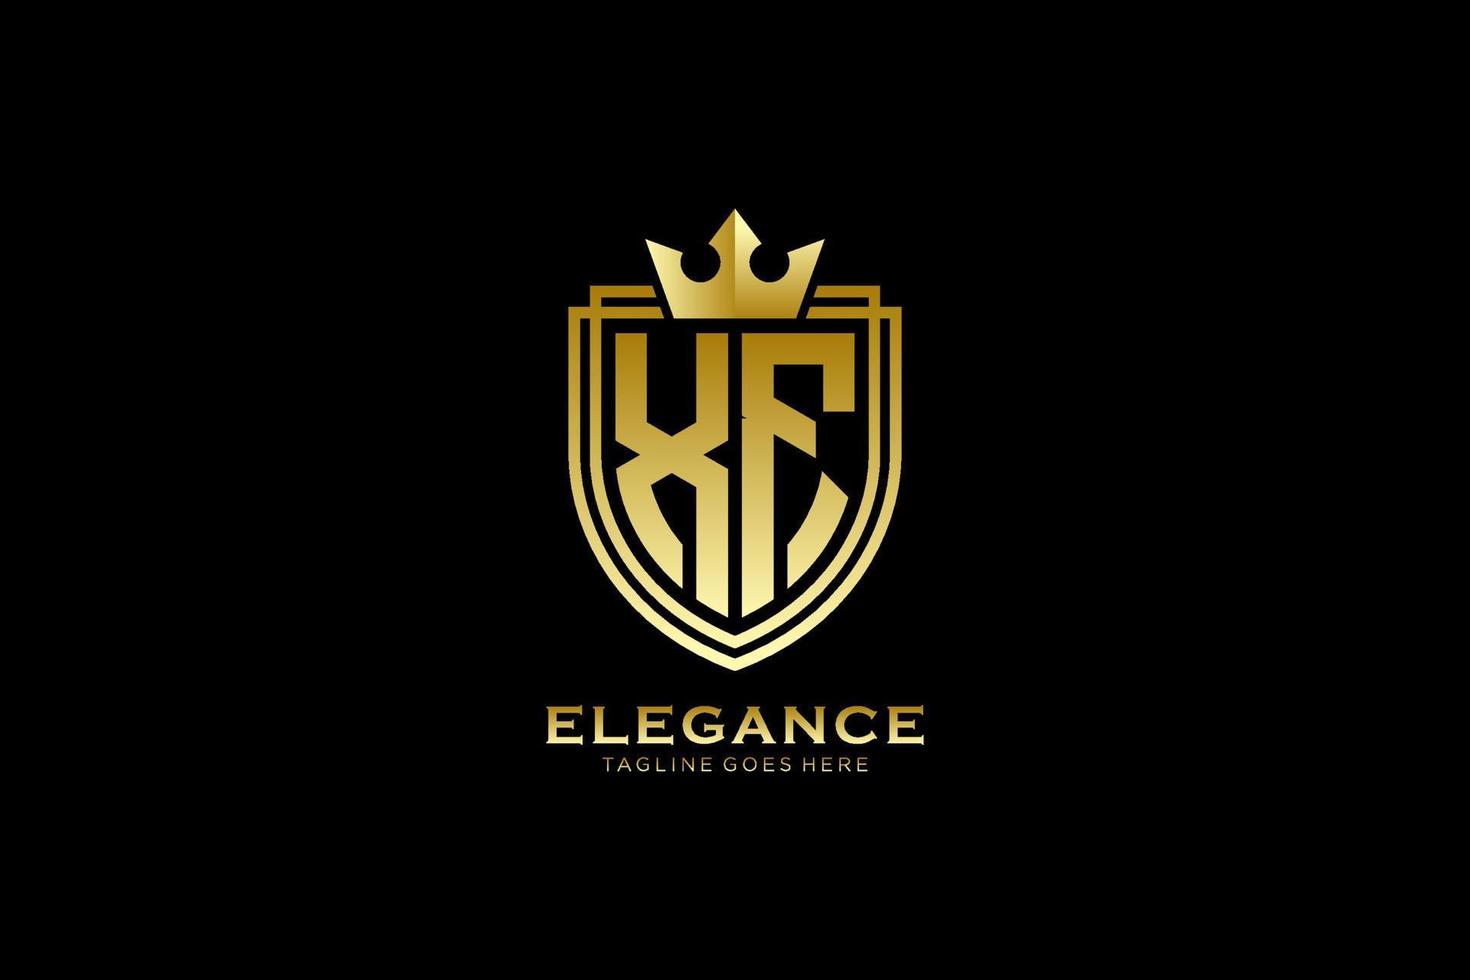 initial XF elegant luxury monogram logo or badge template with scrolls and royal crown - perfect for luxurious branding projects vector